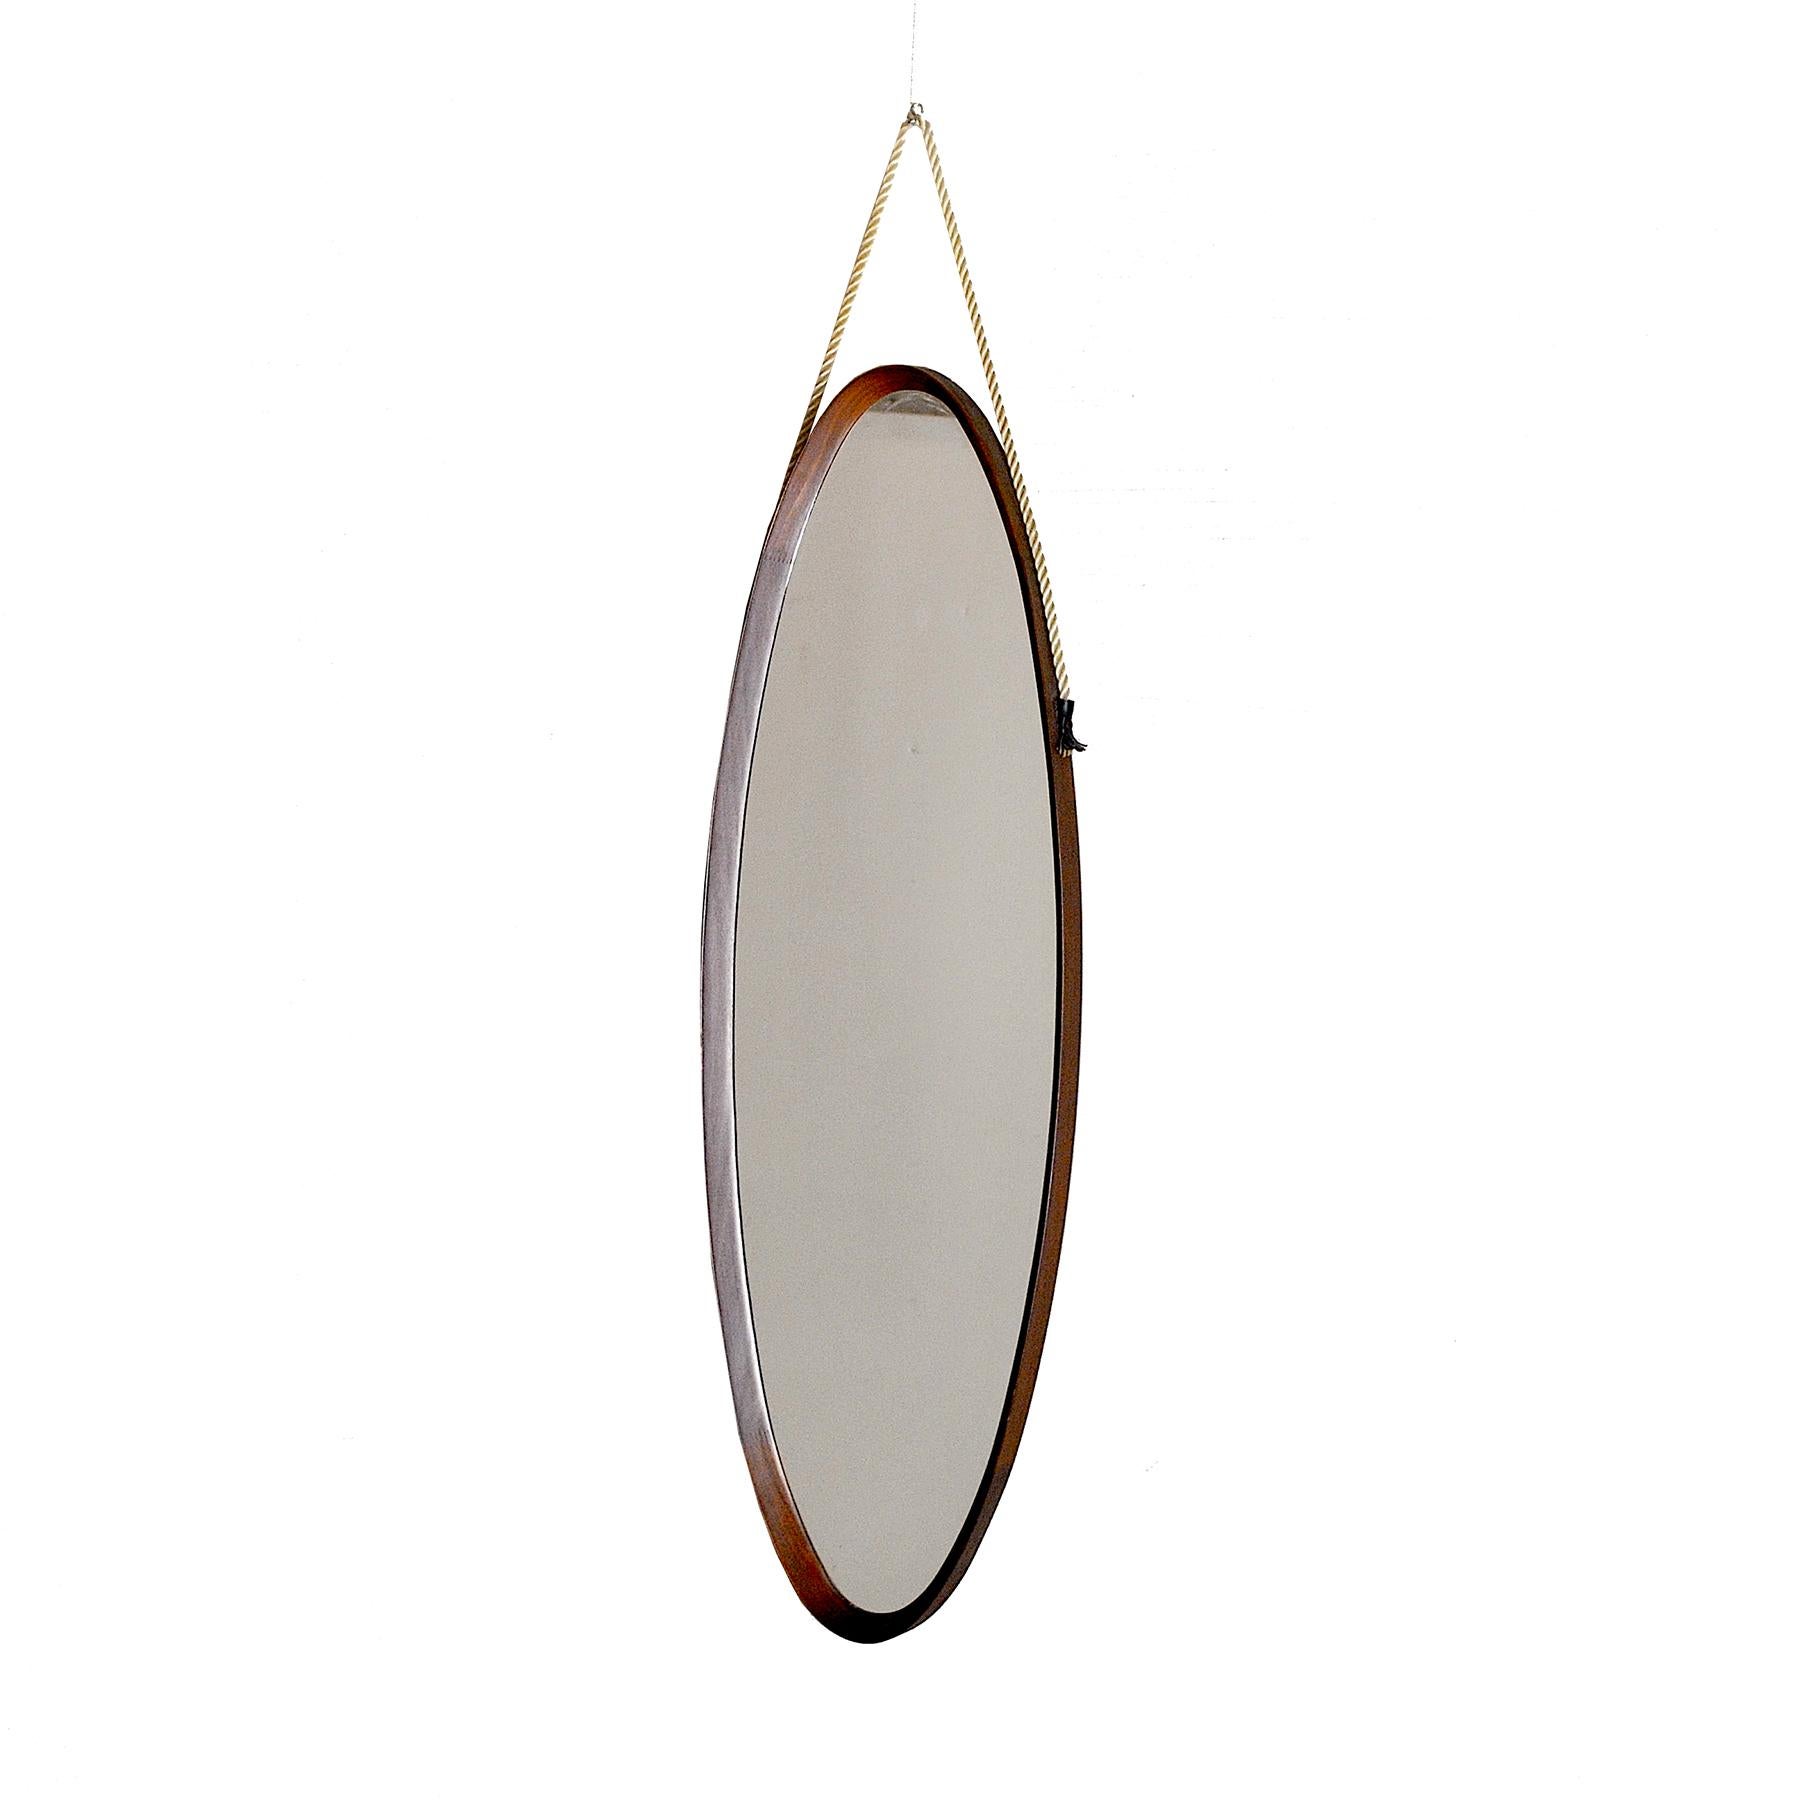 Curved wood mirror, 1960s production, in the Campo and Graffi style.